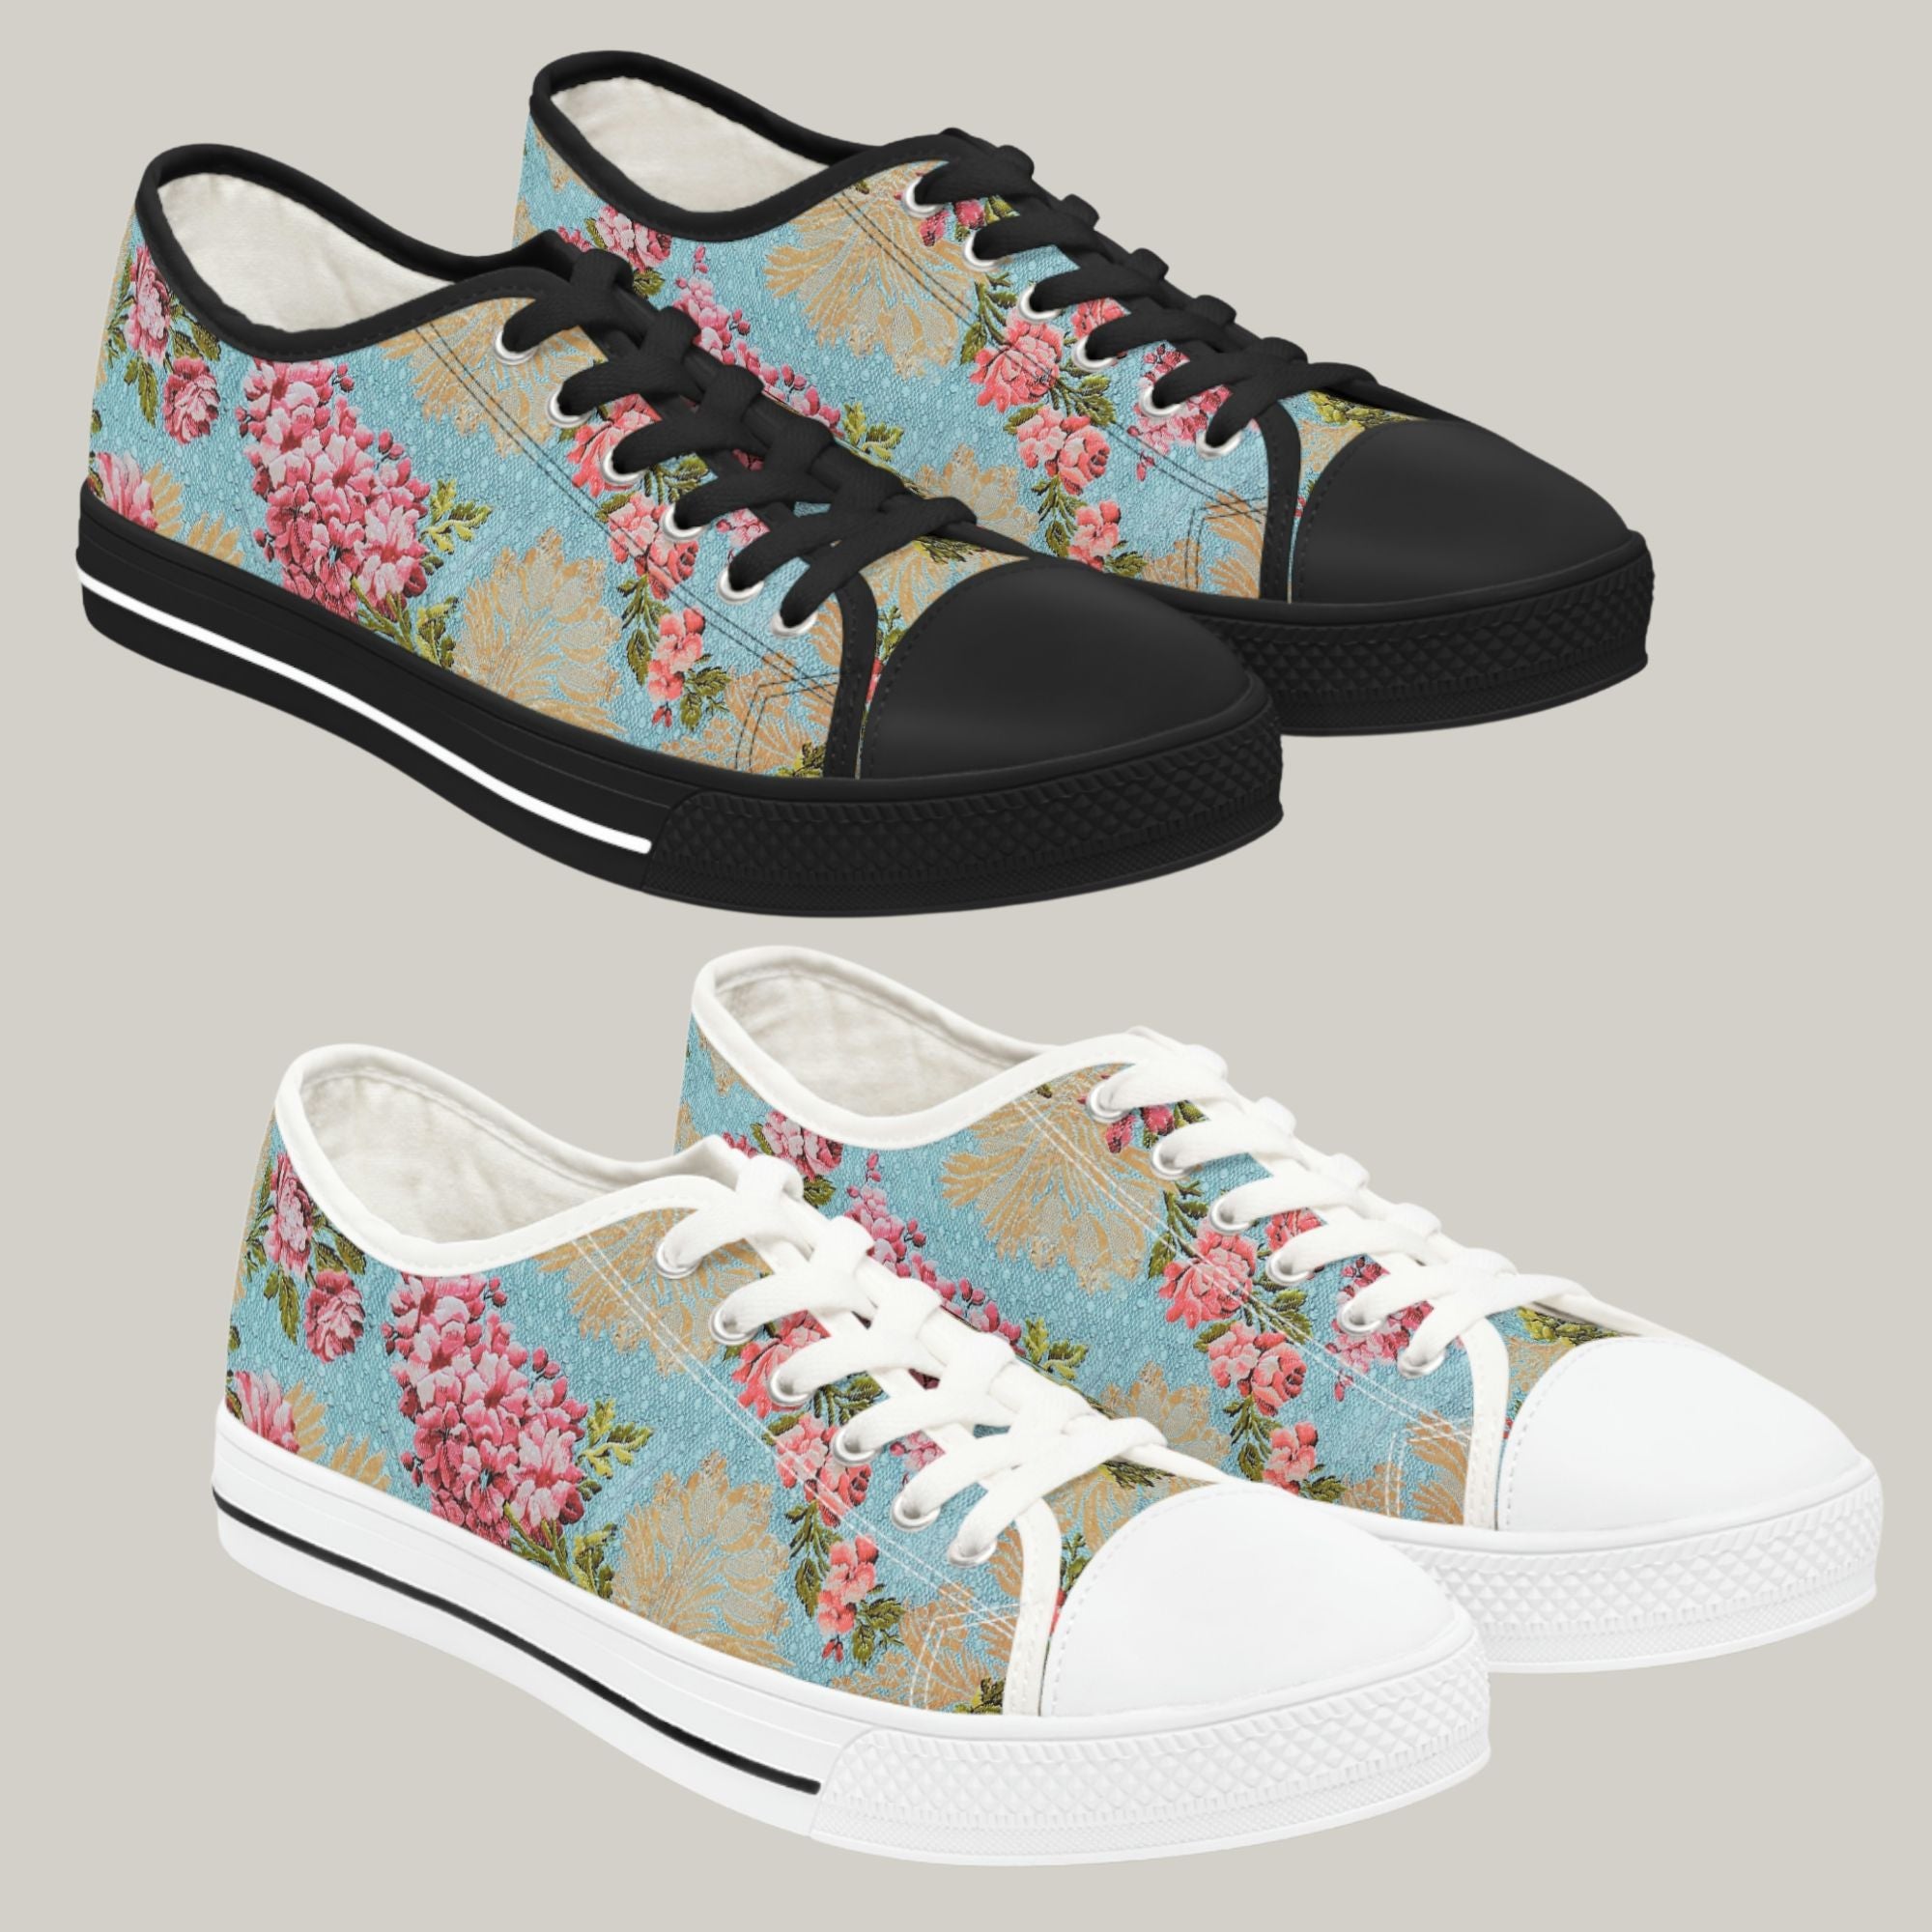 CHINTZY FLOWERS & PALE BLUE - Women's Low Top Sneakers Black and White Sole